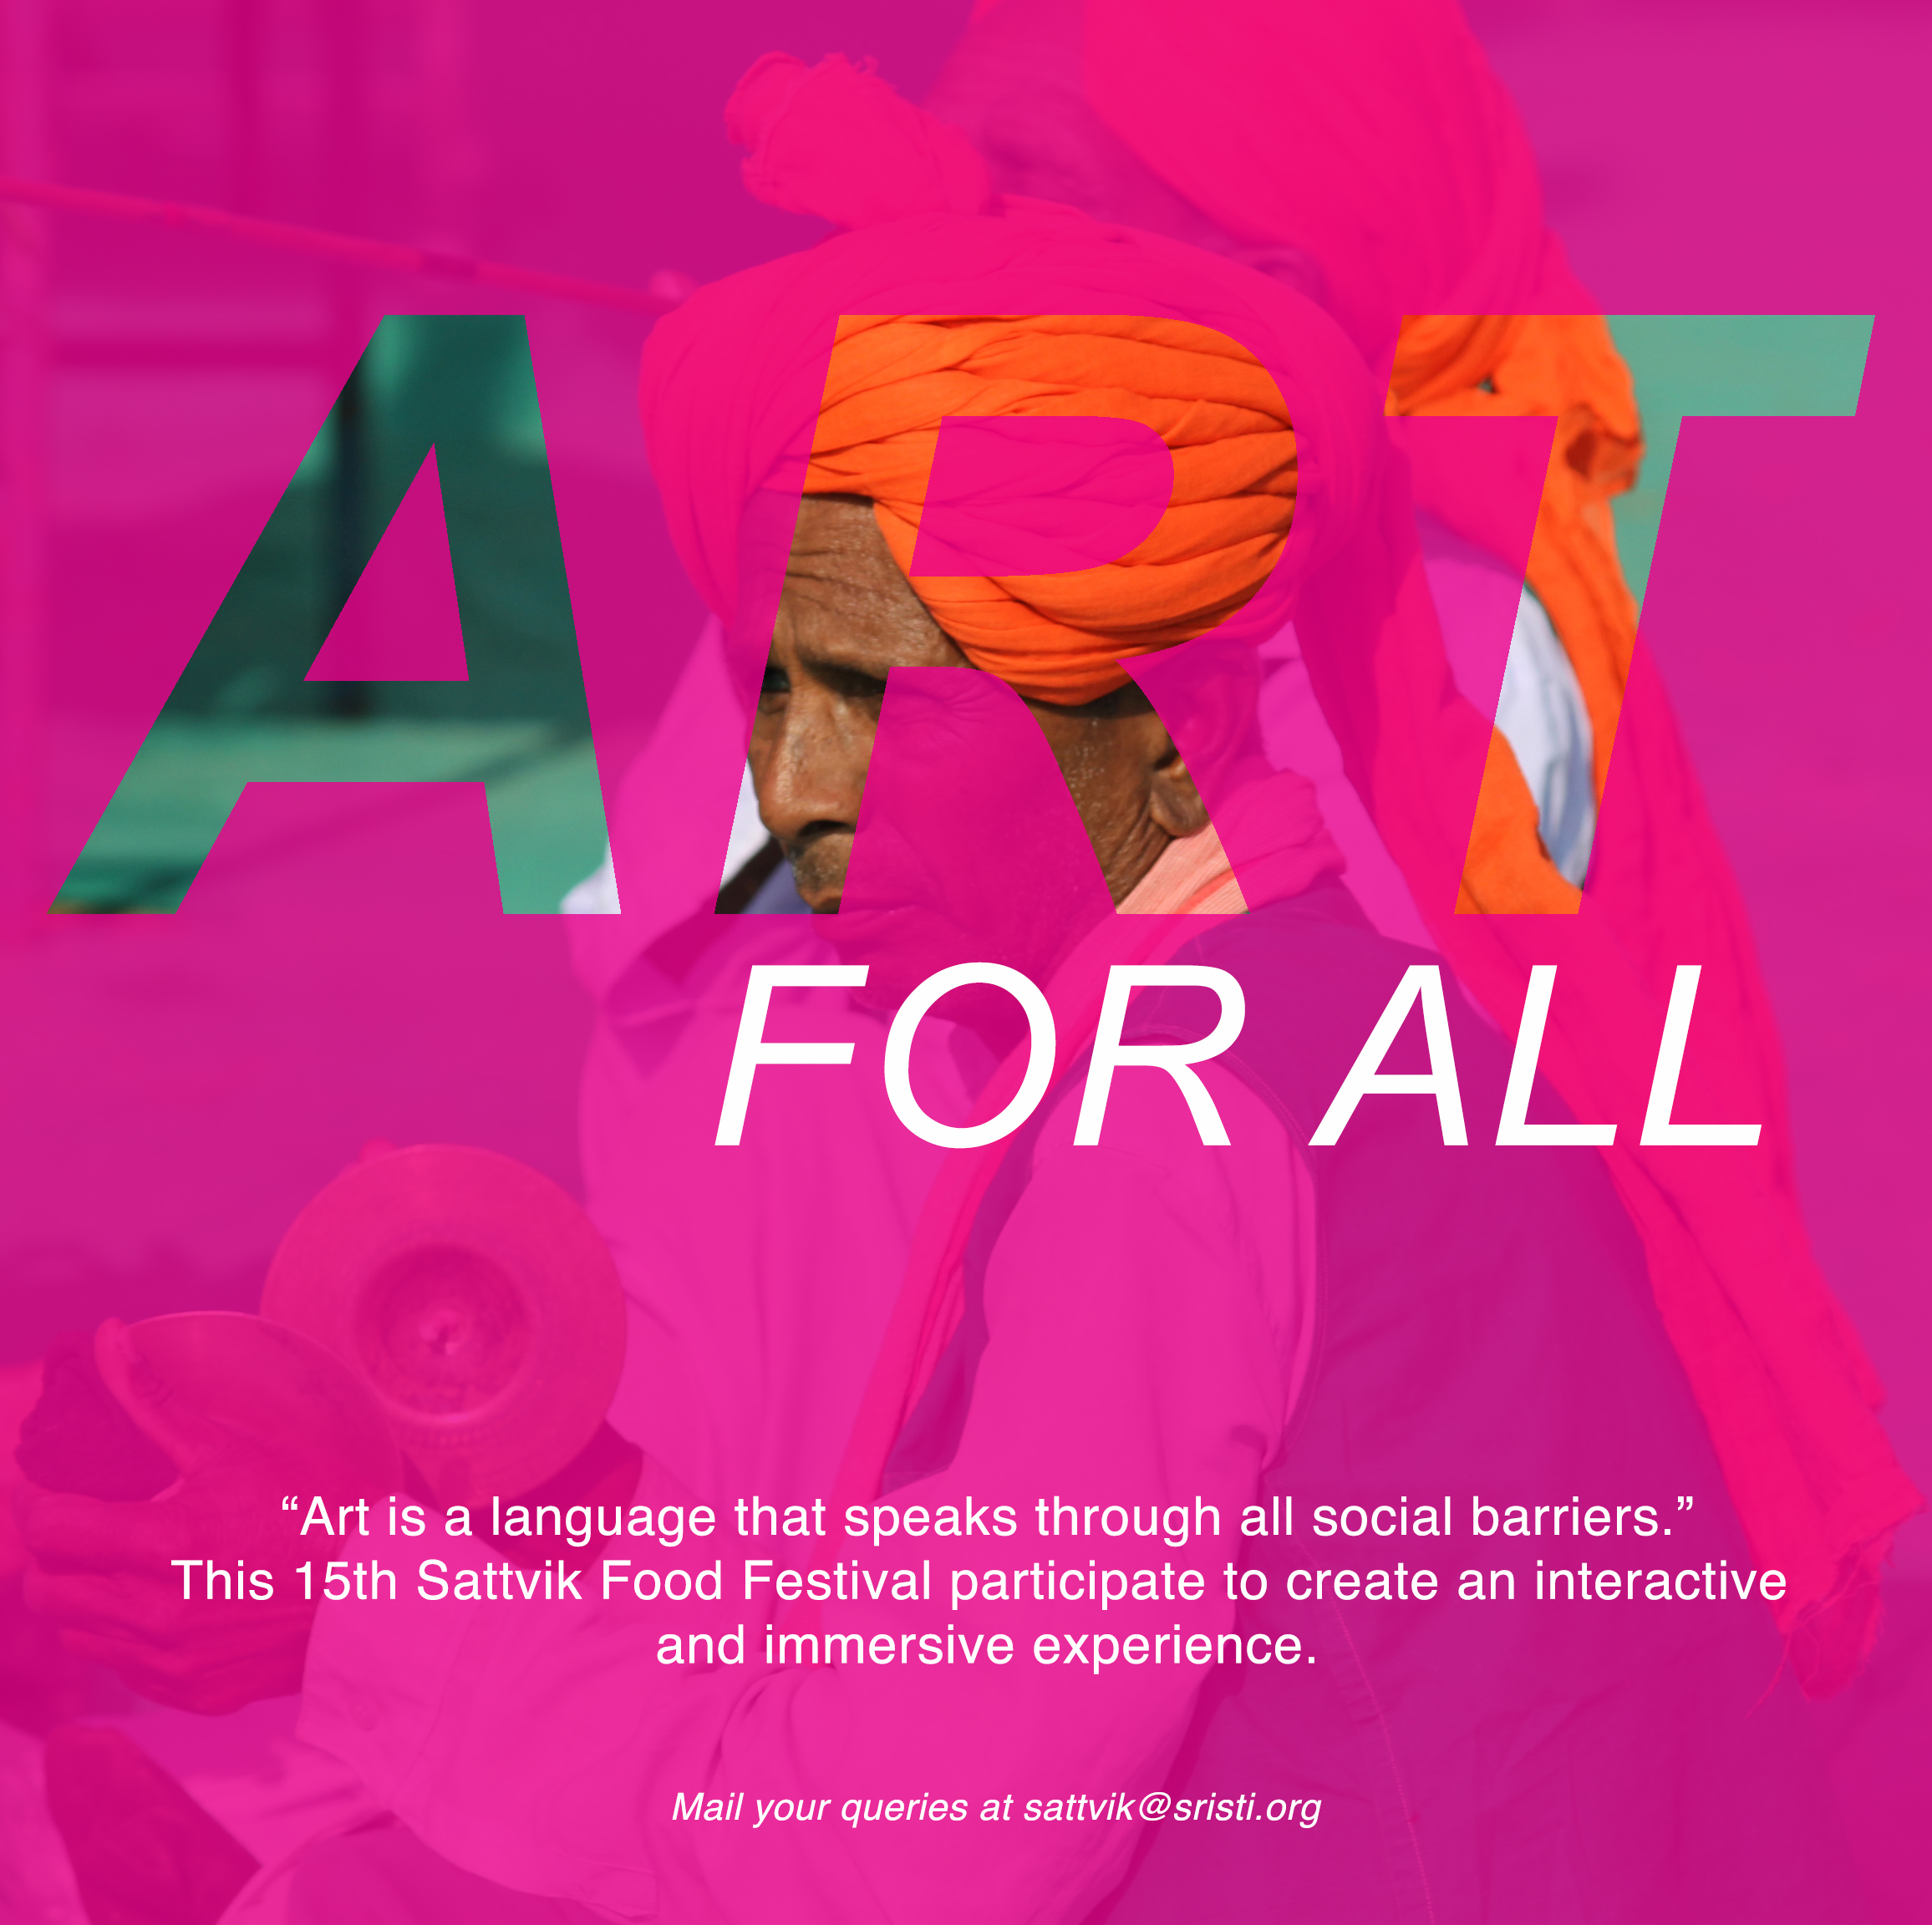 About “Art for All”